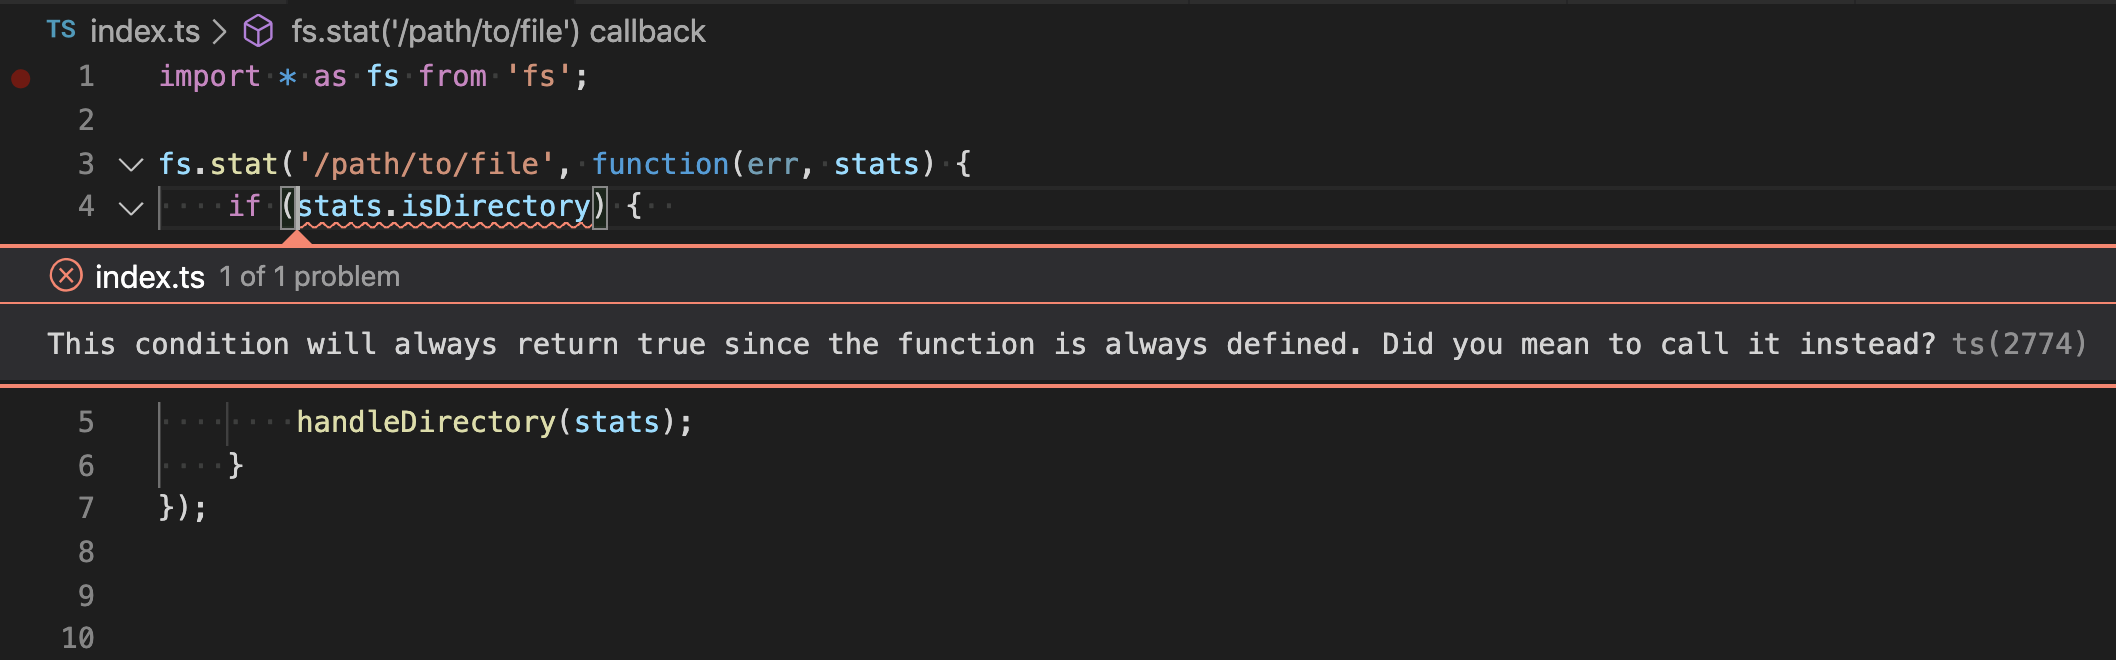 VS Code can alert when you forget to call a function